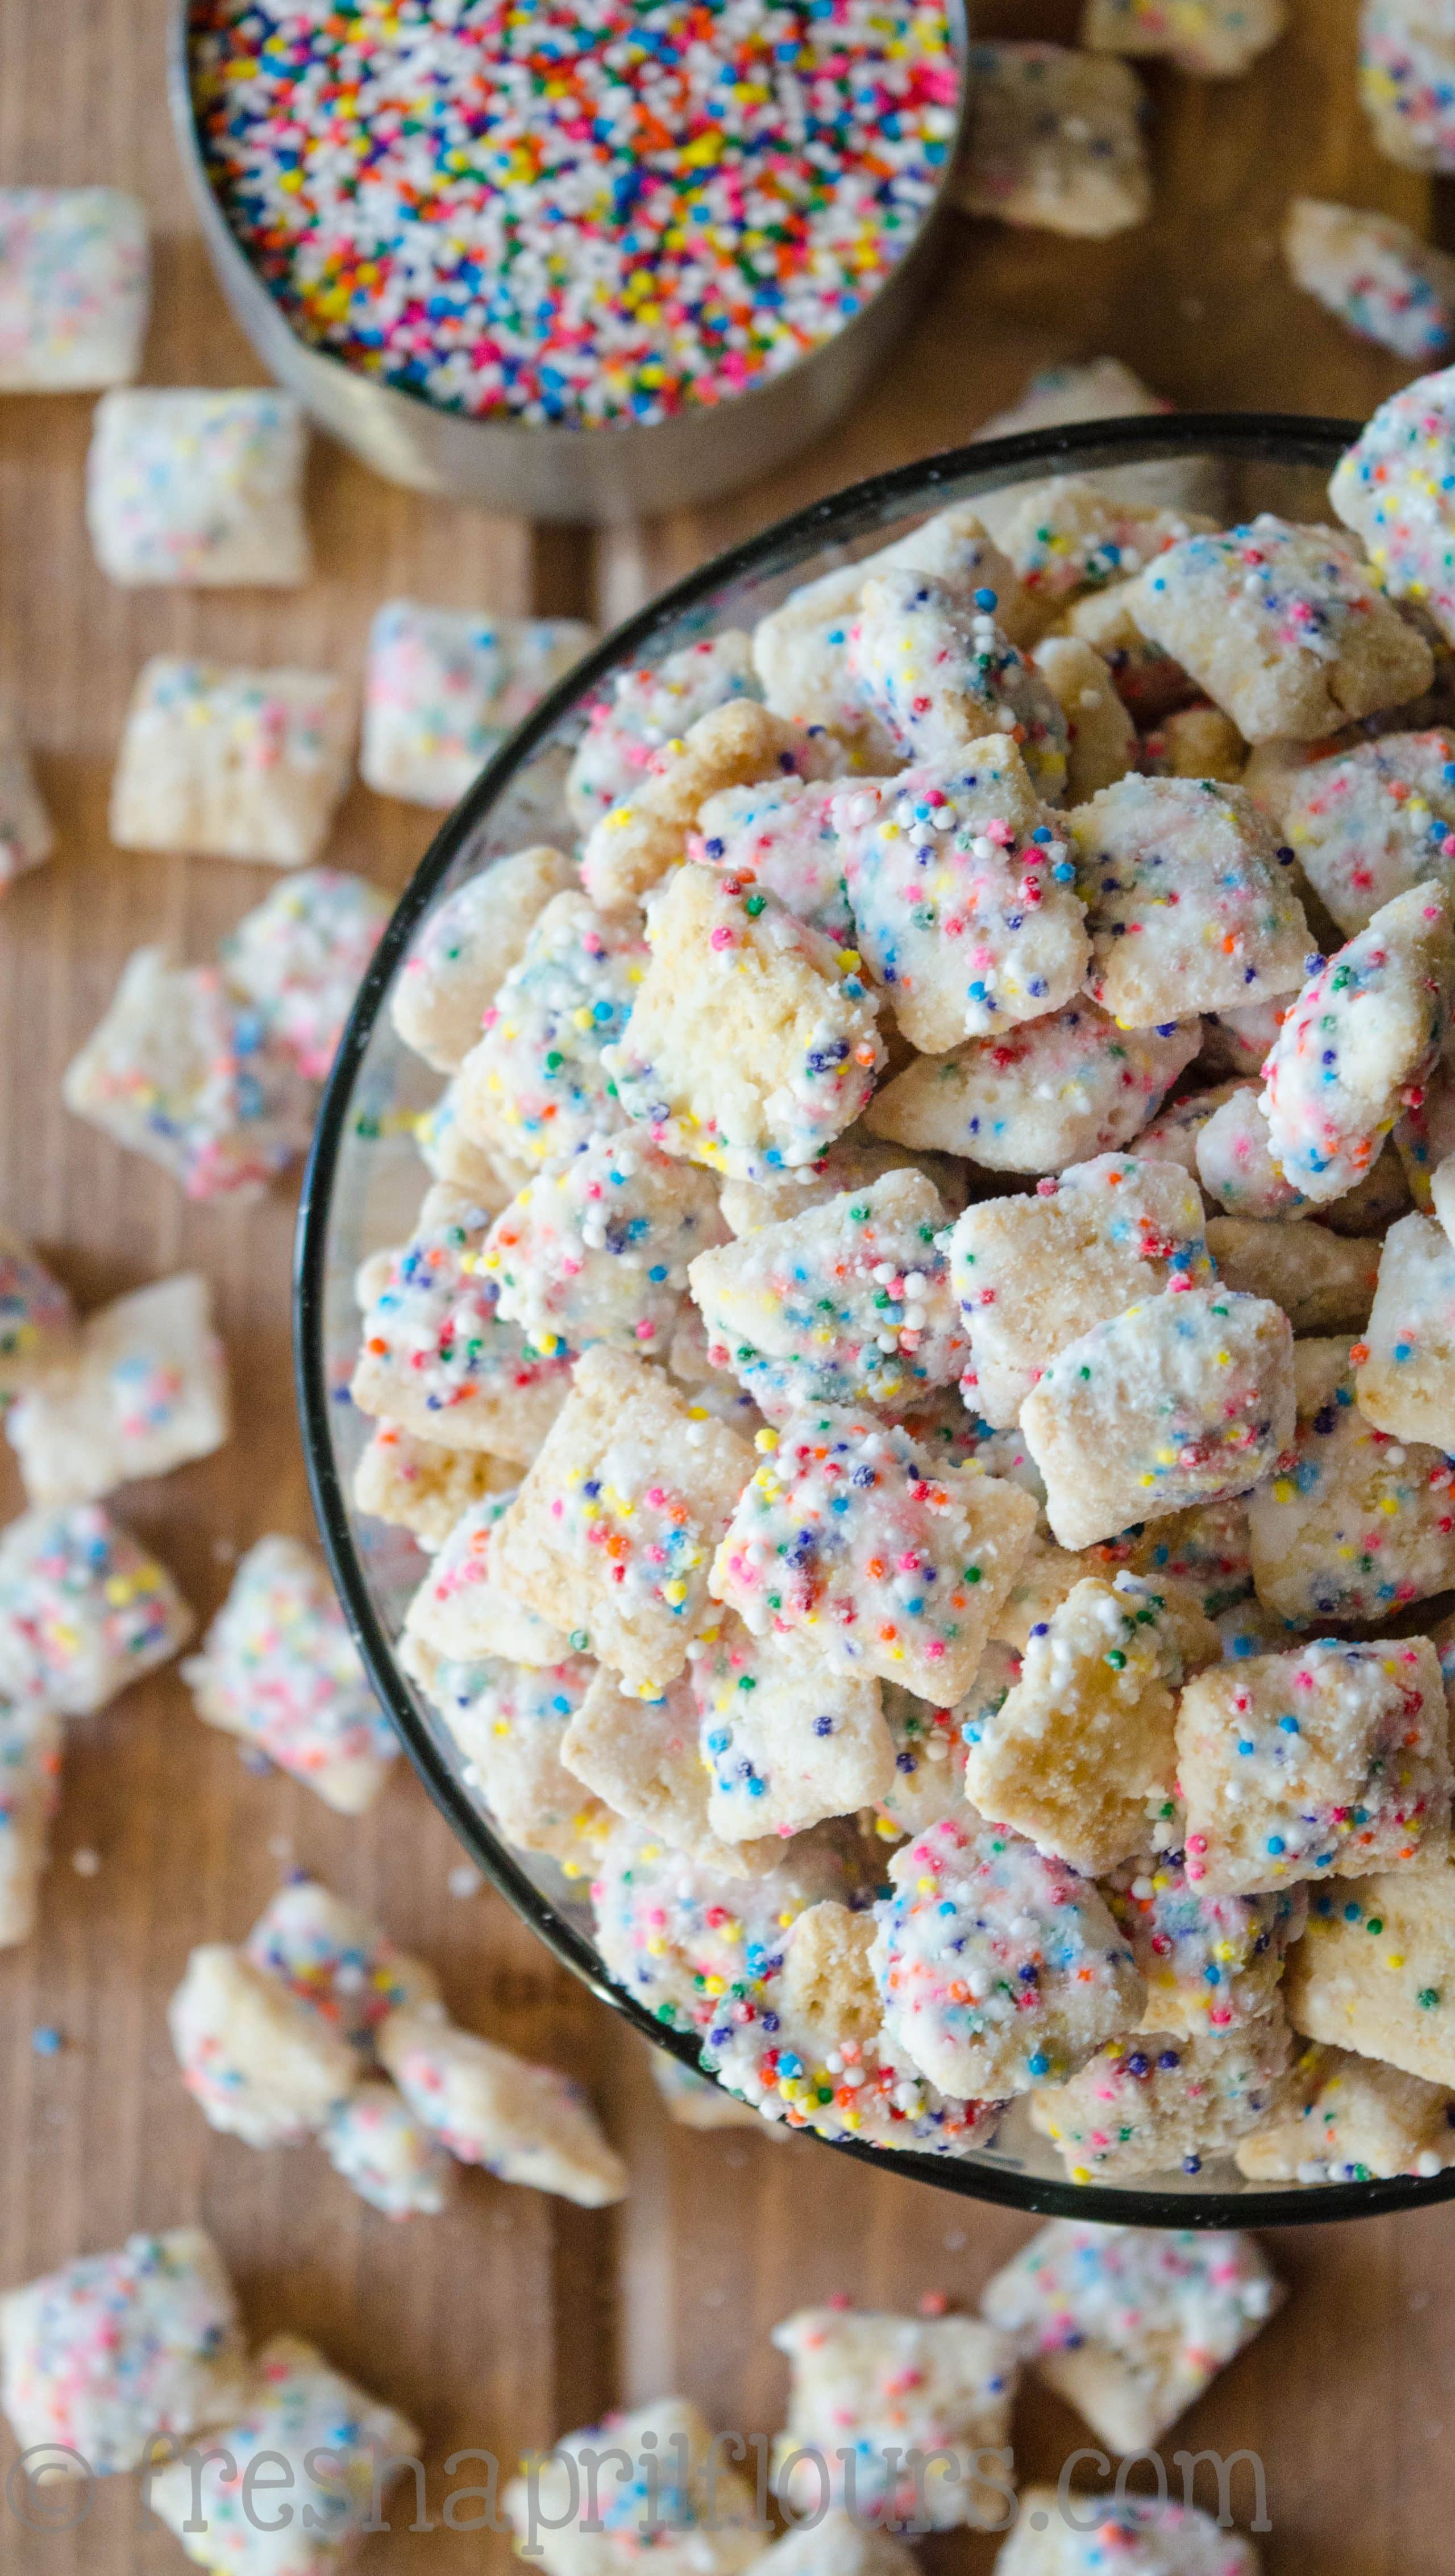 Call it funfetti puppy chow, call it birthday cake puppy chow-- this is the crunchy, cake-battery take on the classic Puppy Chow you want for your next celebration! via @frshaprilflours